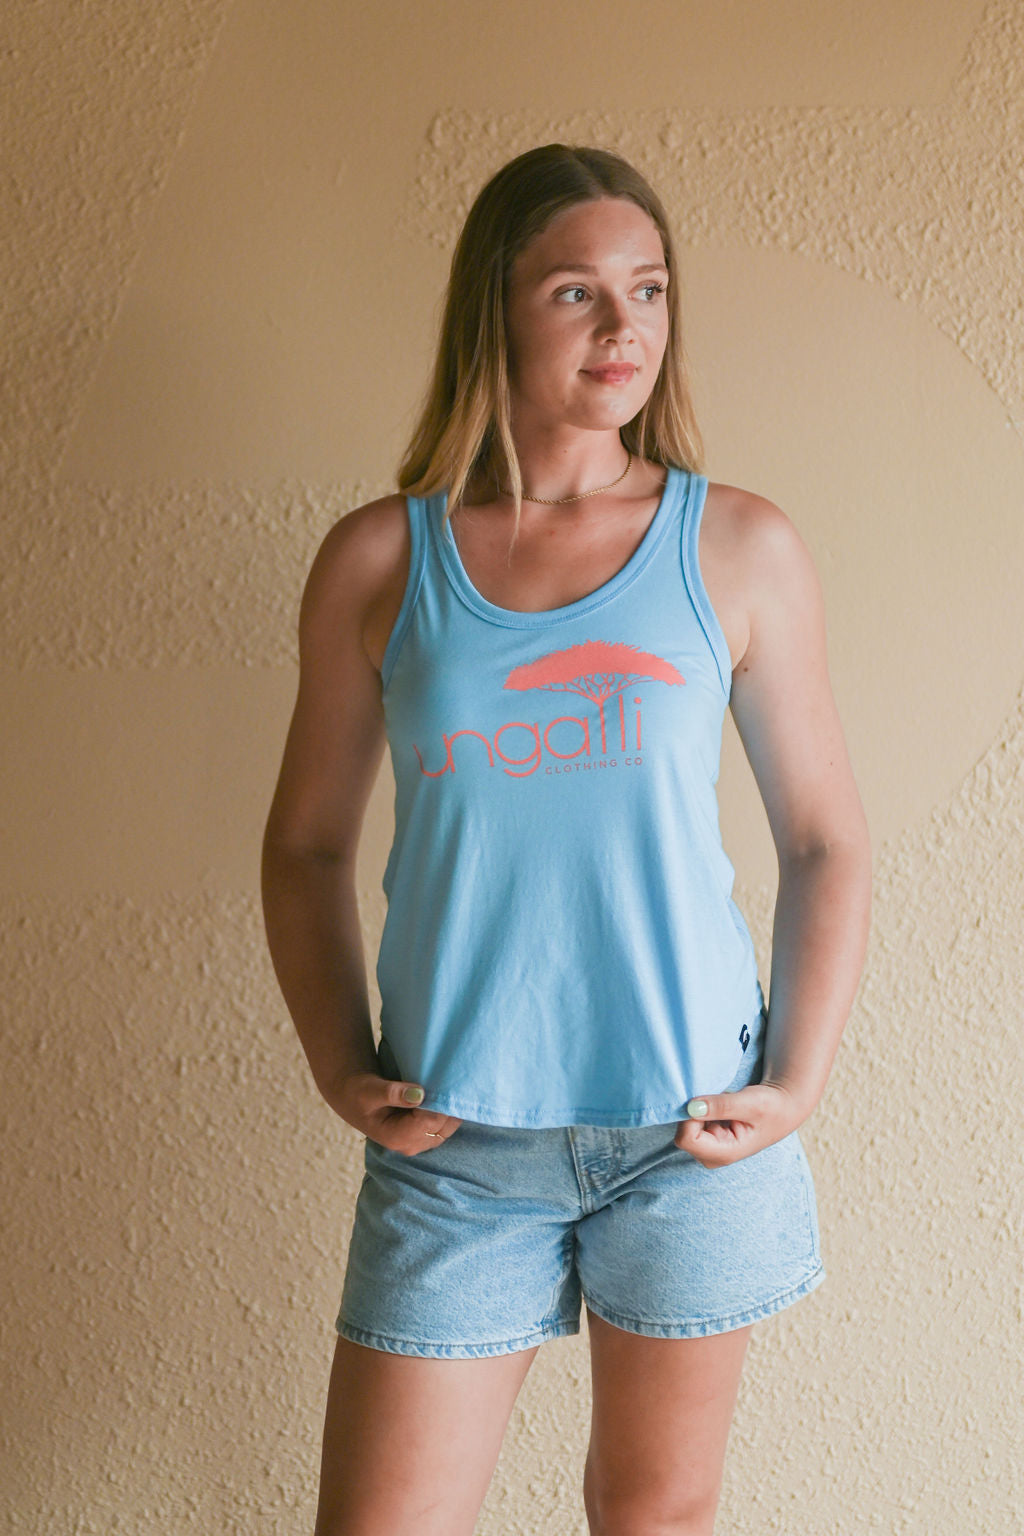 Women's organic blue tank top with pink Ungalli logo on front